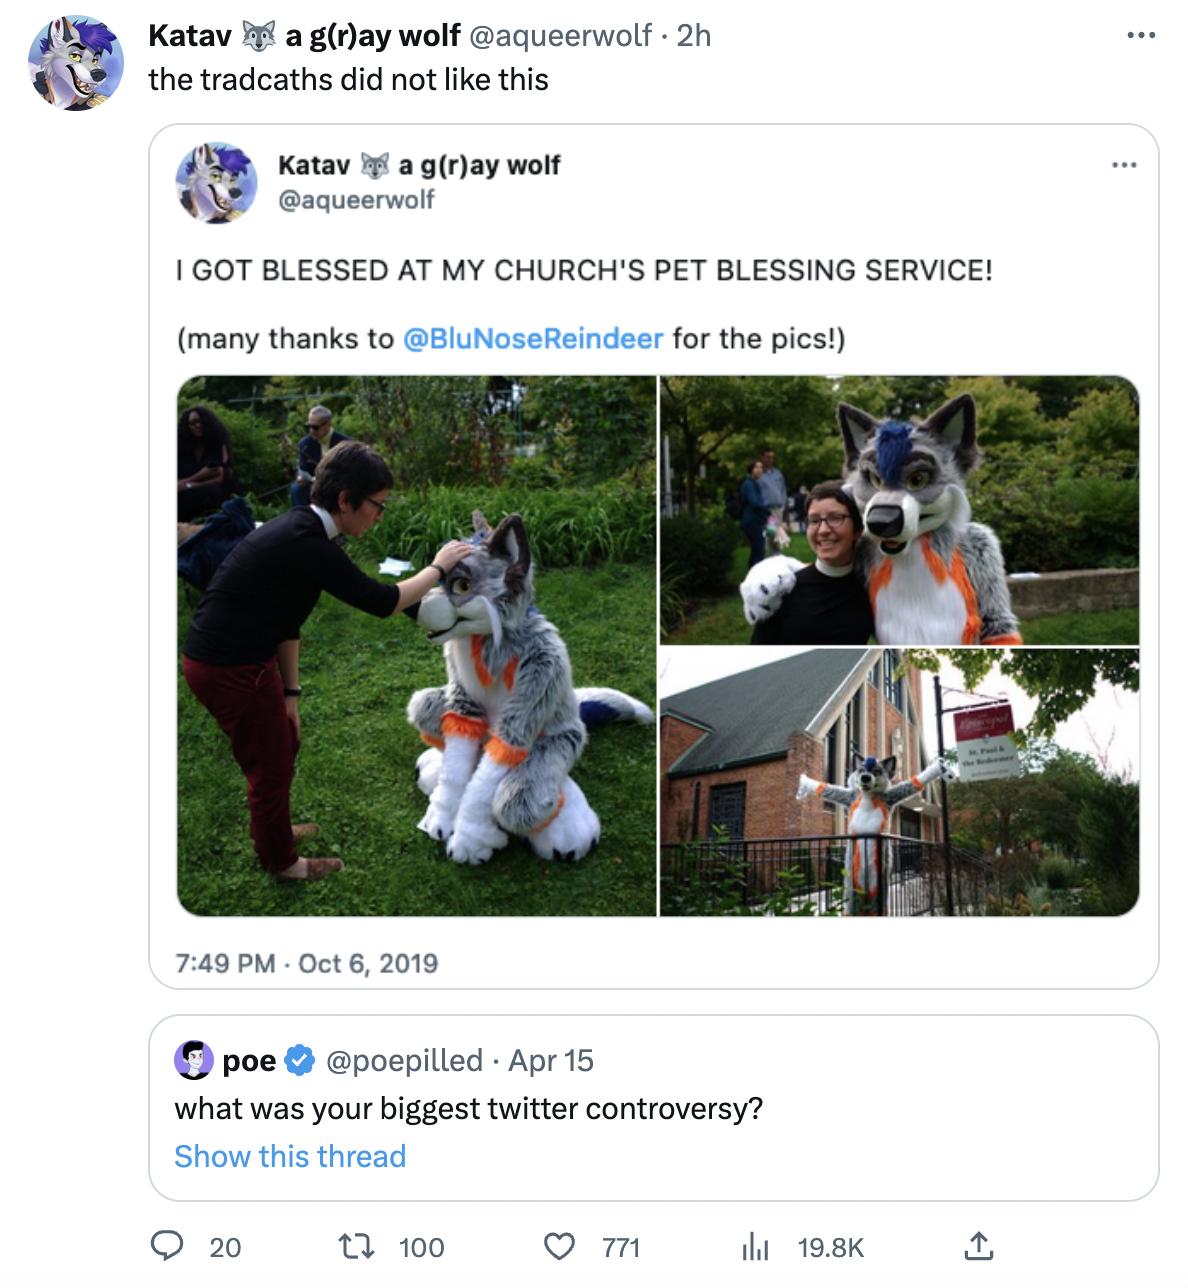 controversial tweets - dog - the tradcaths did not this Katava gray wolf I Got Blessed At My Church'S Pet Blessing Service! many thanks to for the pics! poe Apr 15 what was your biggest twitter controversy? Show this thread